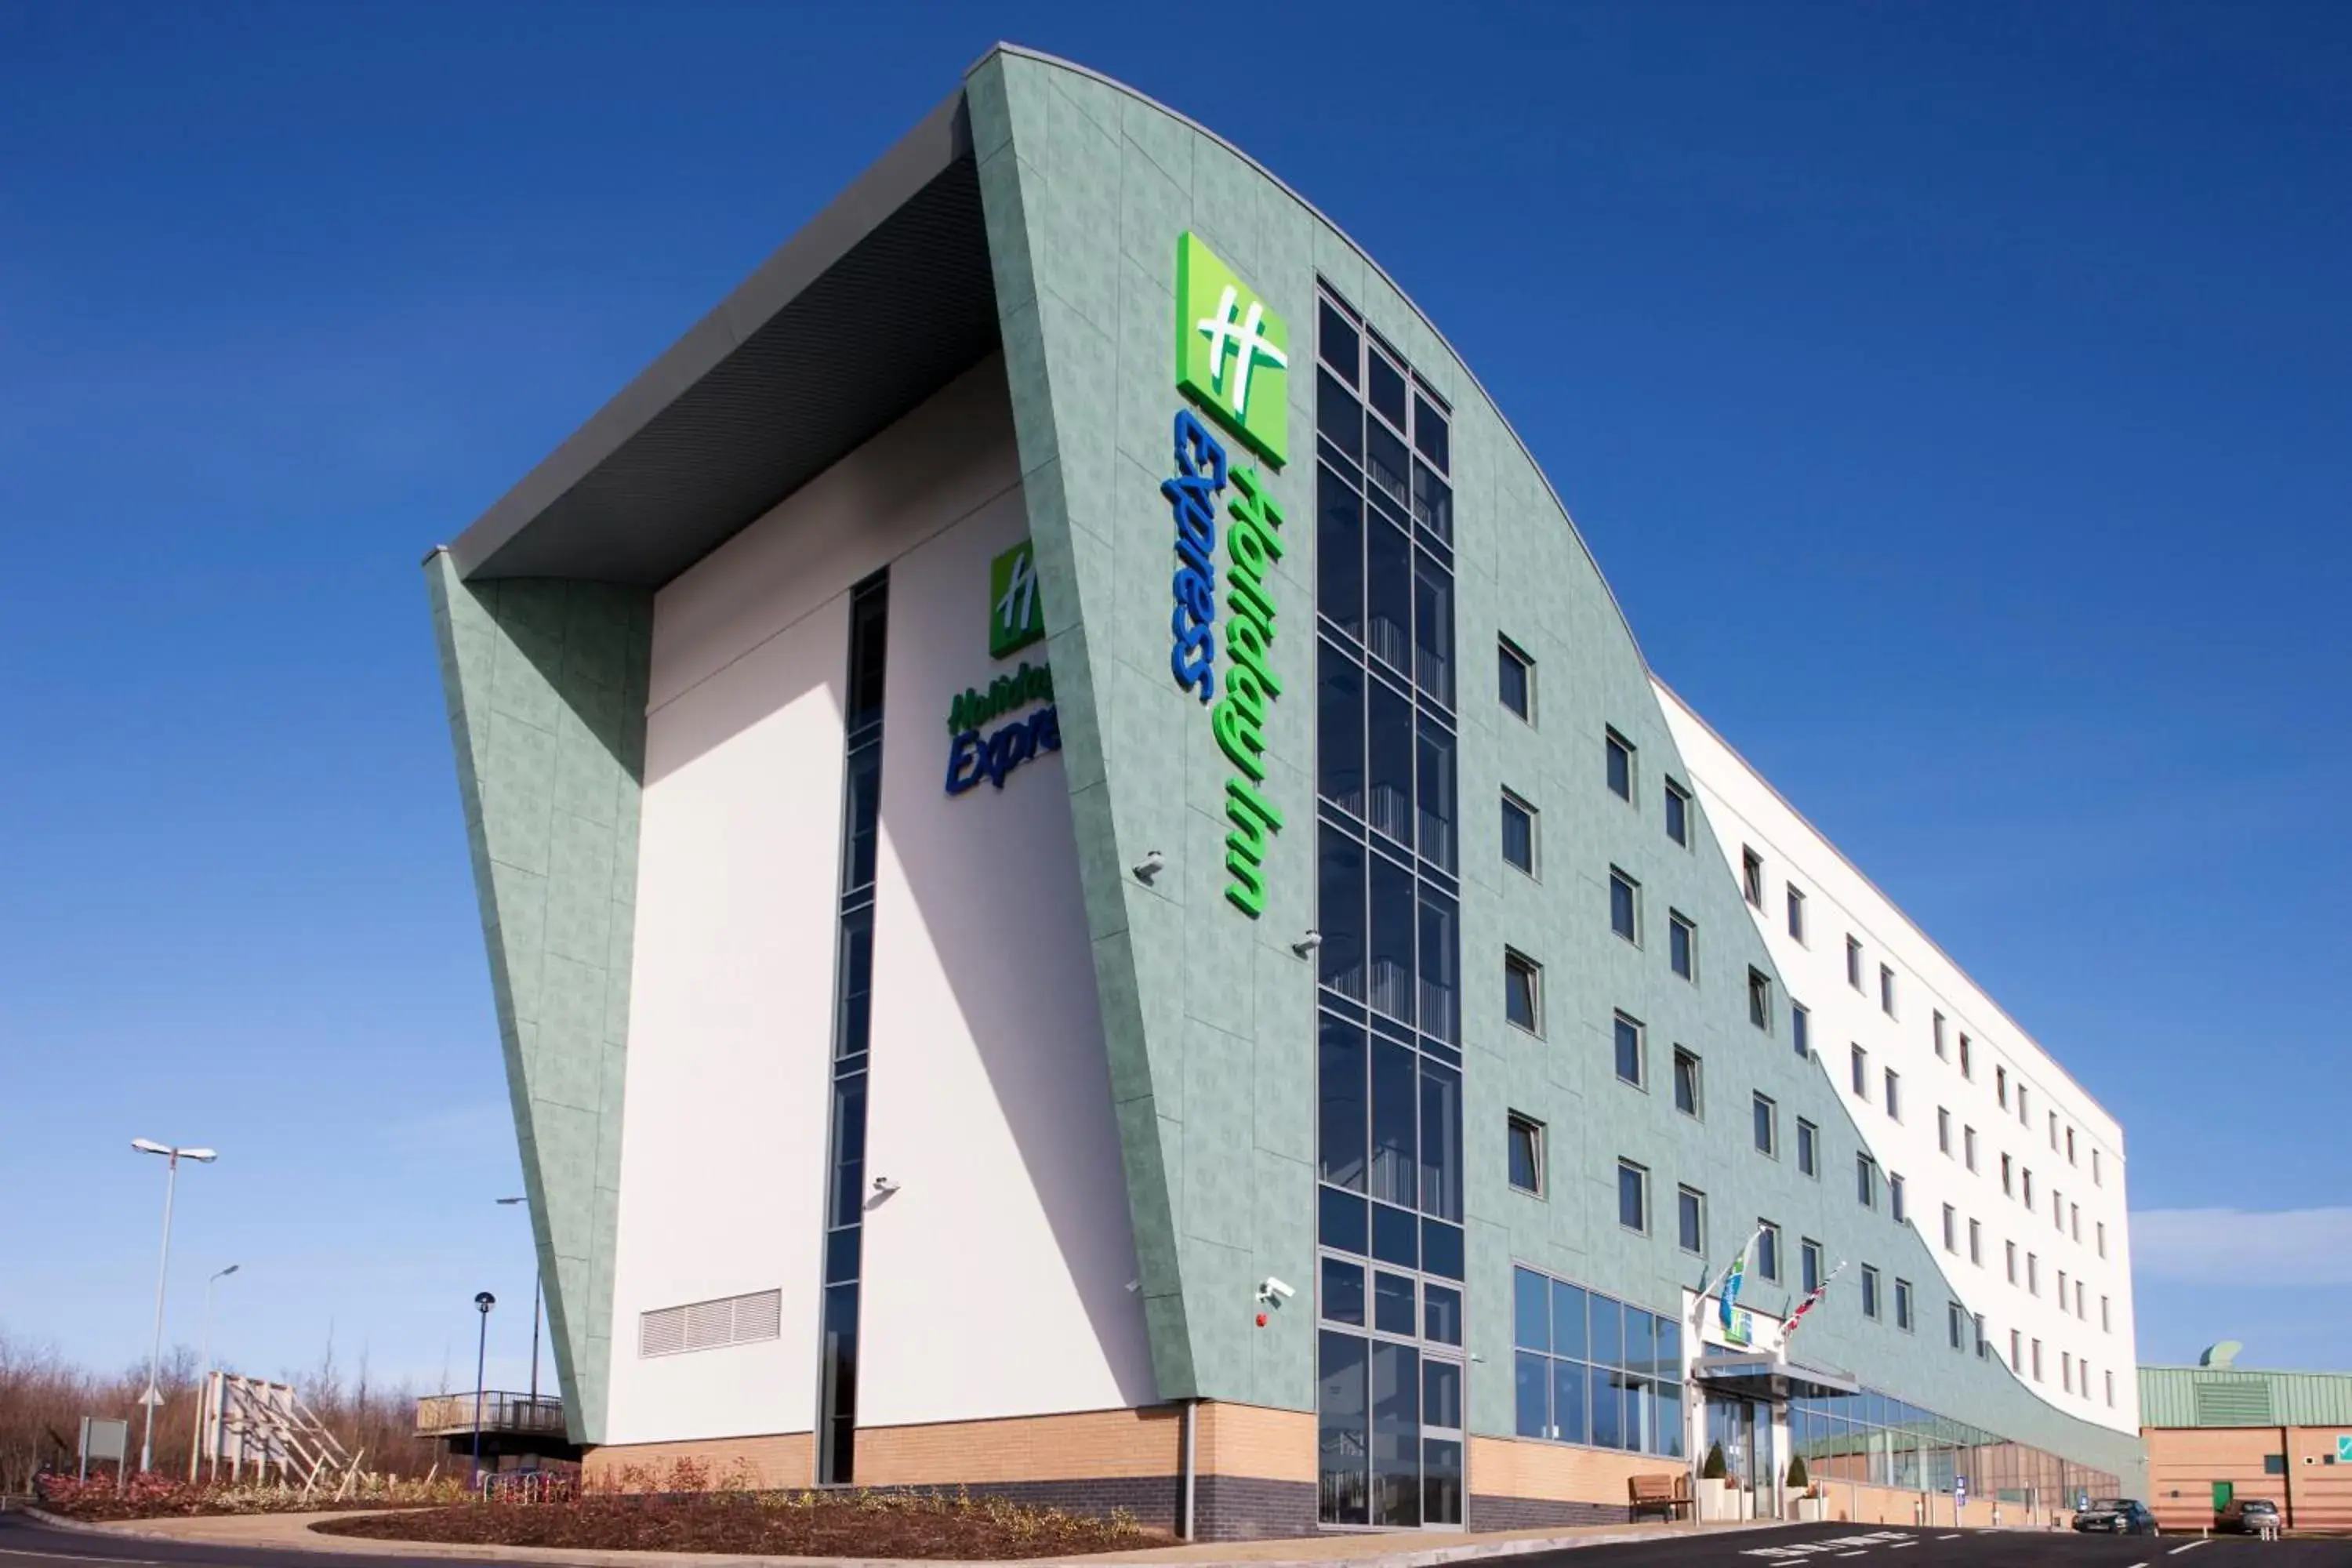 Property Building in Holiday Inn Express Tamworth